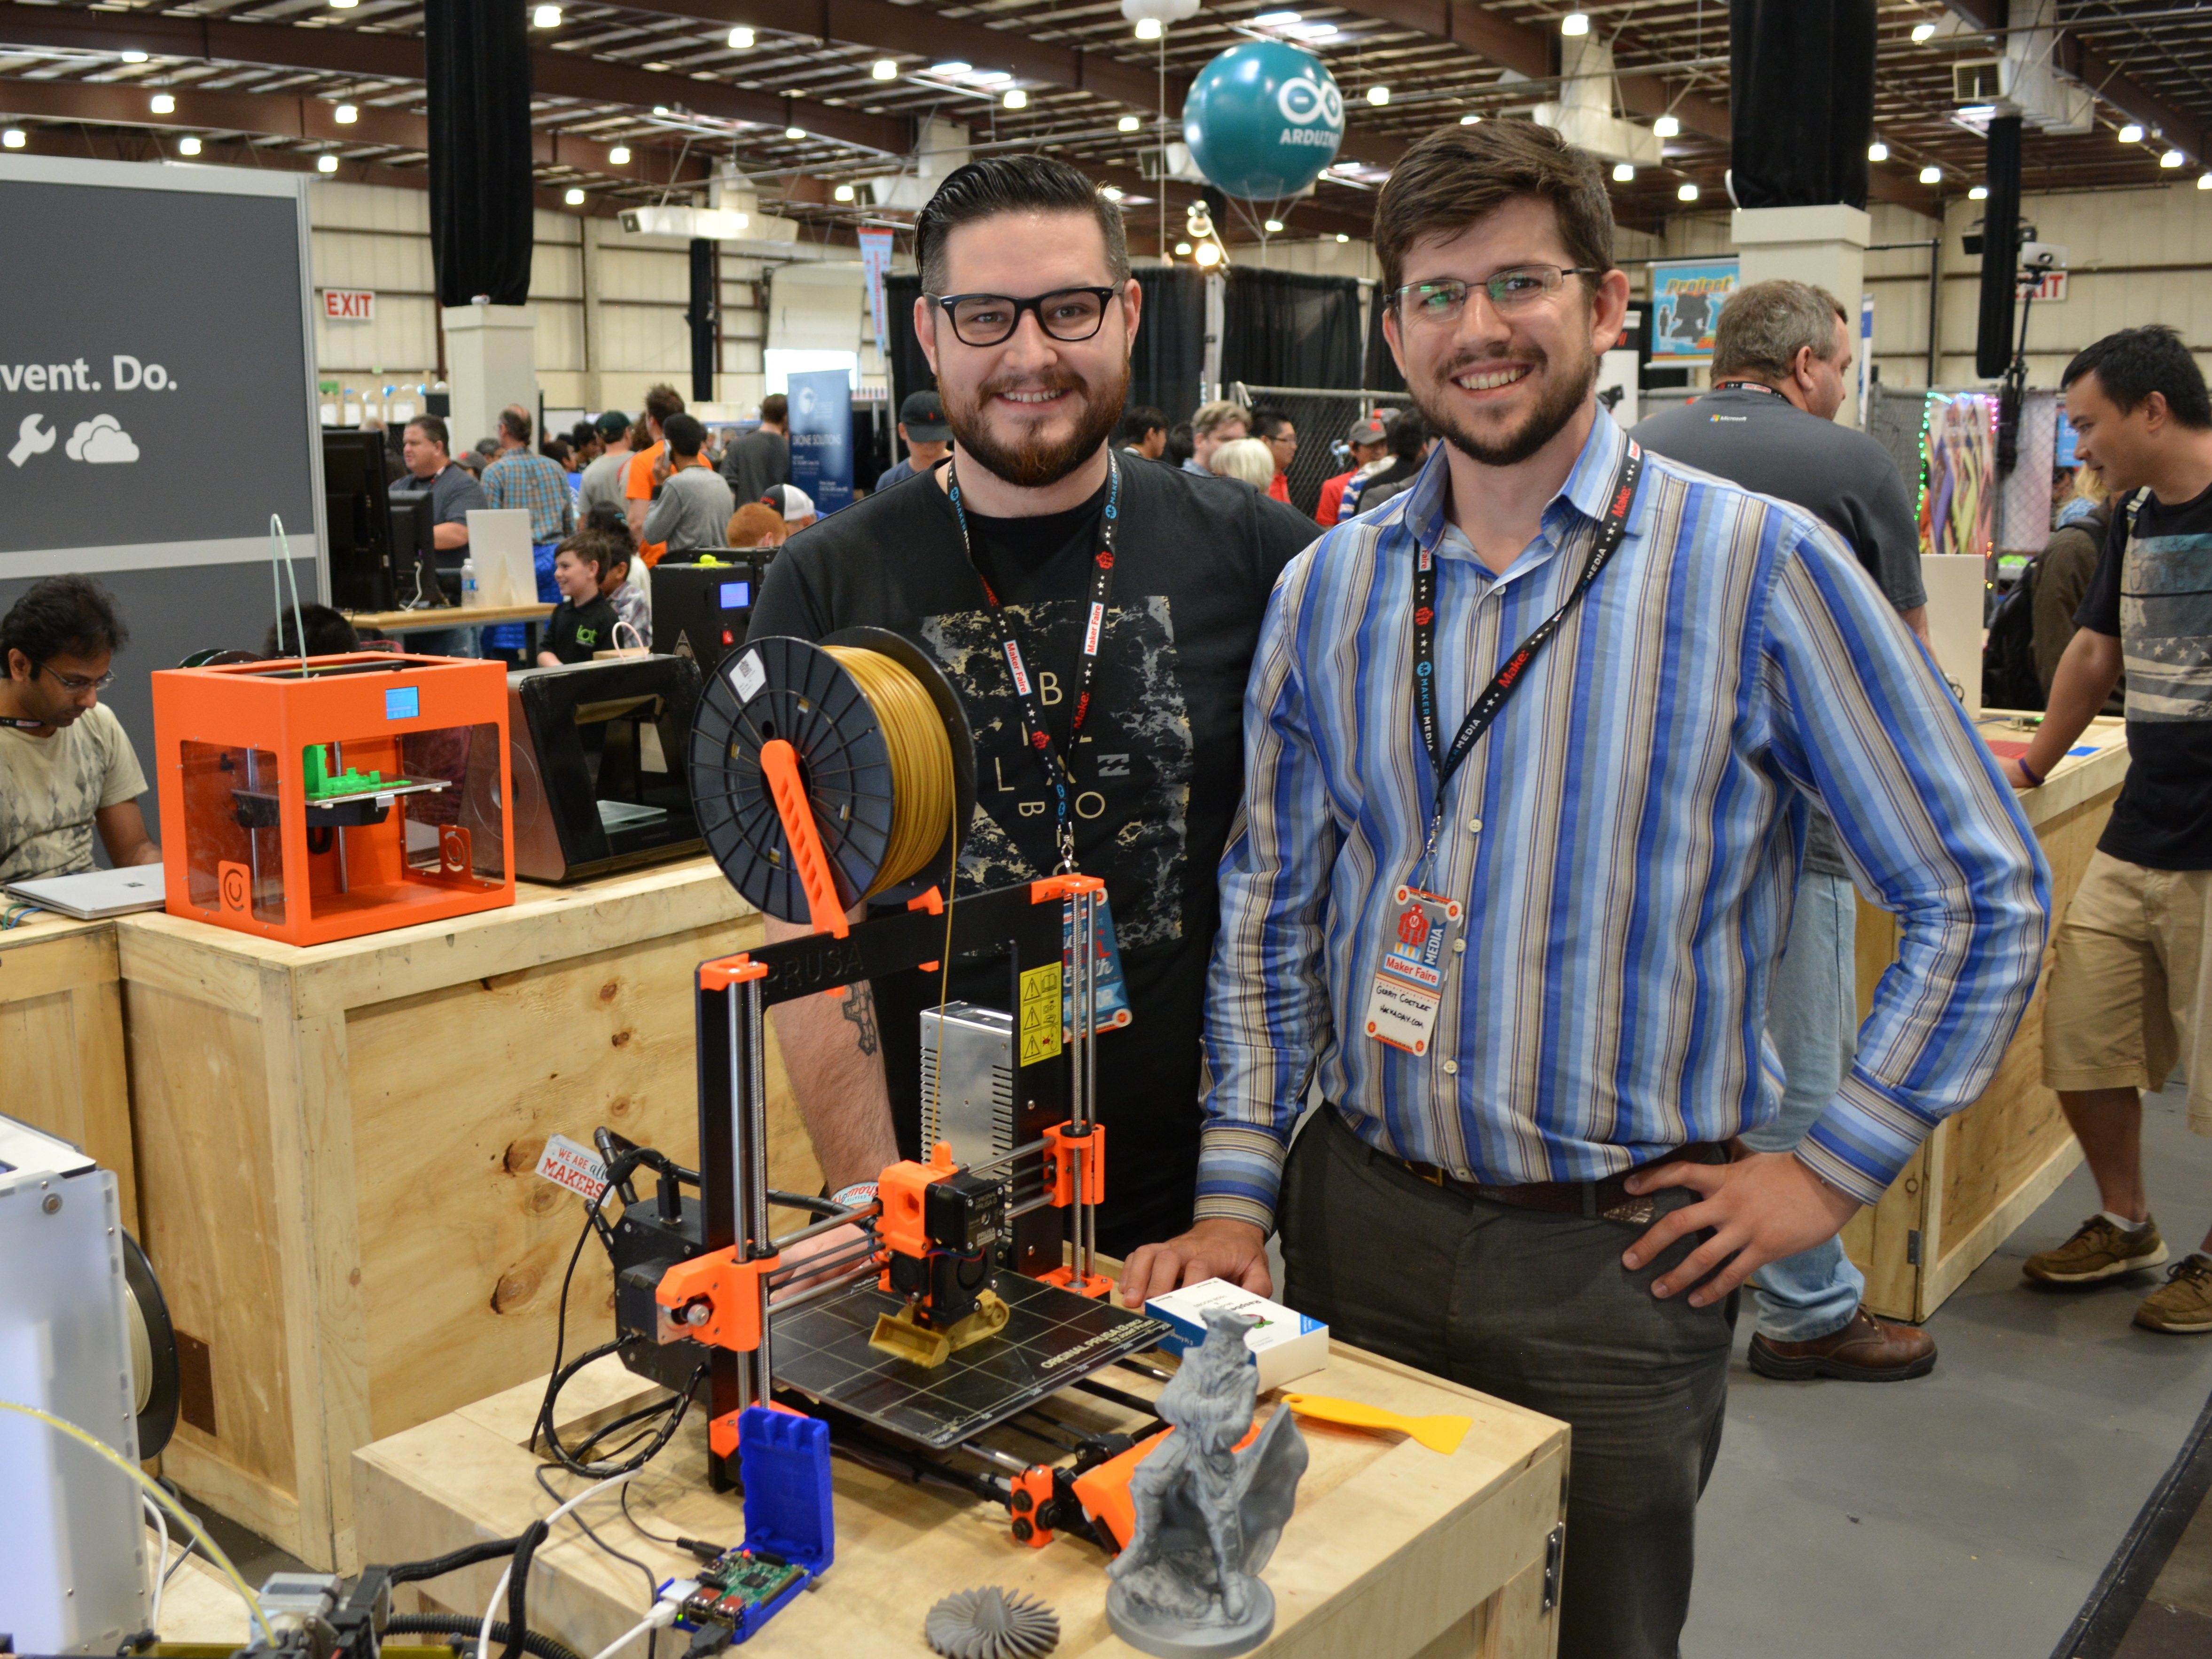 Gcode and extruder going crazy – General software discussion – Prusa3D Forum